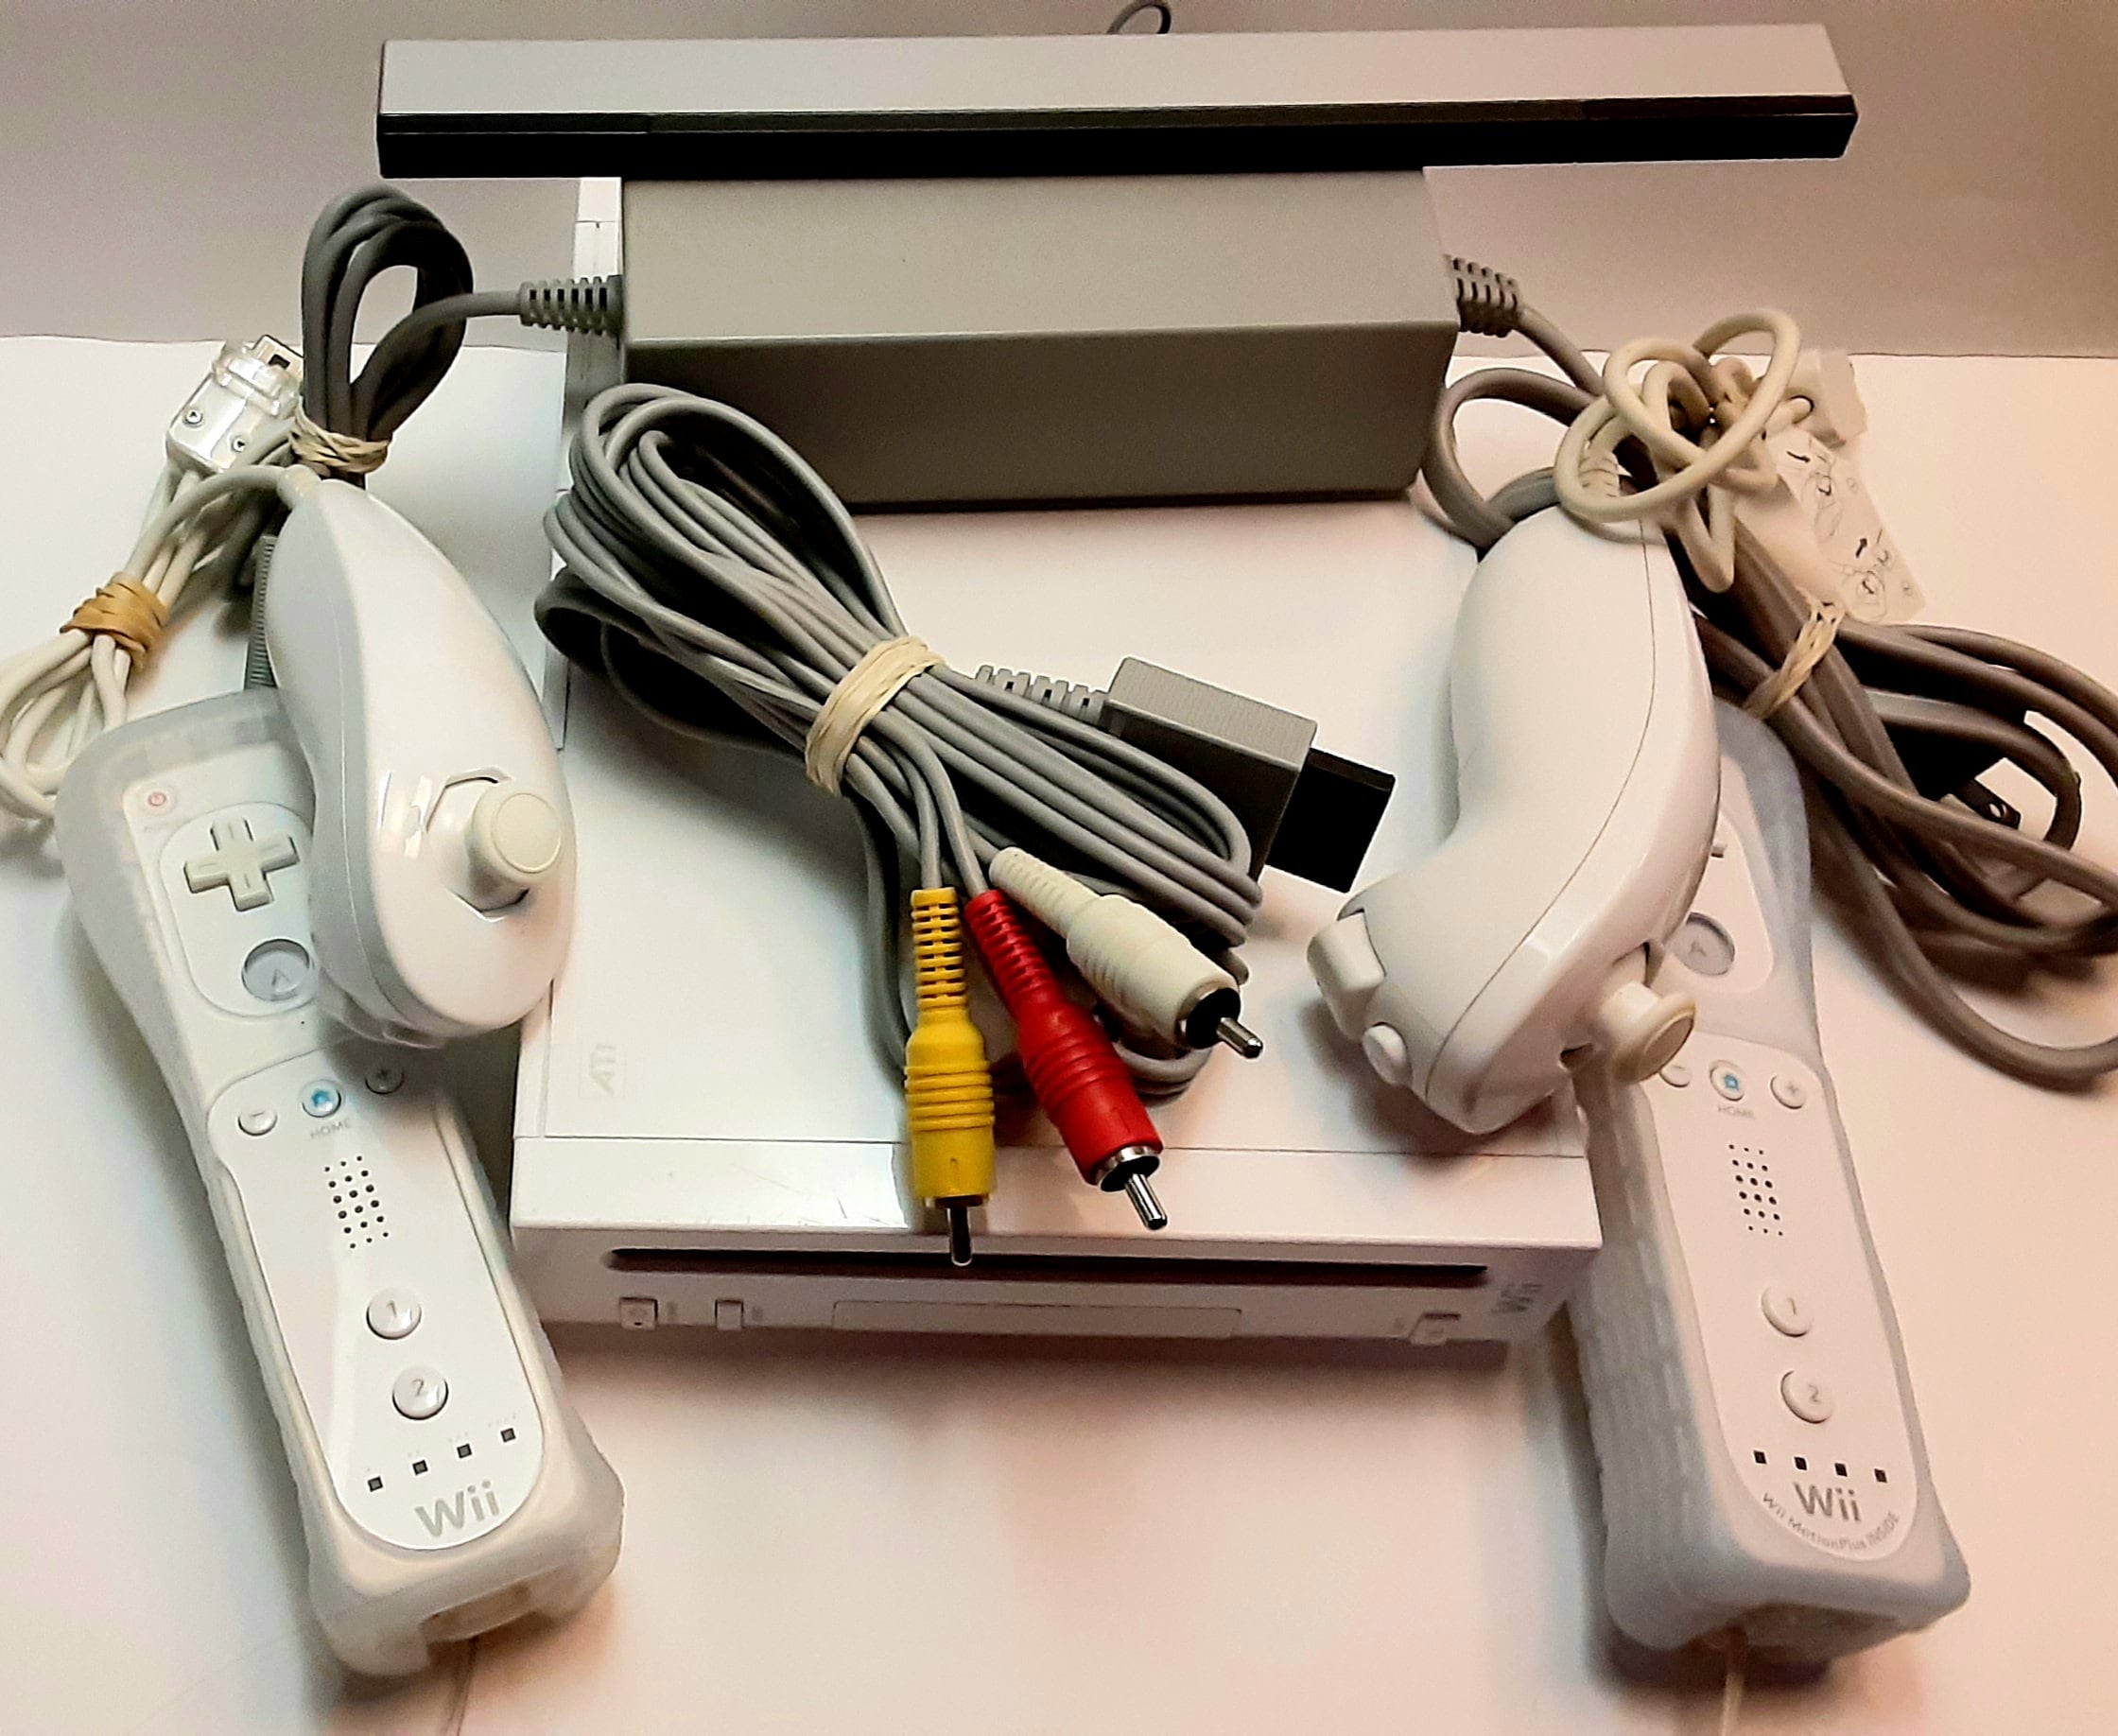 Wii Game System Pre Owned as Is All Tested in Working - Etsy